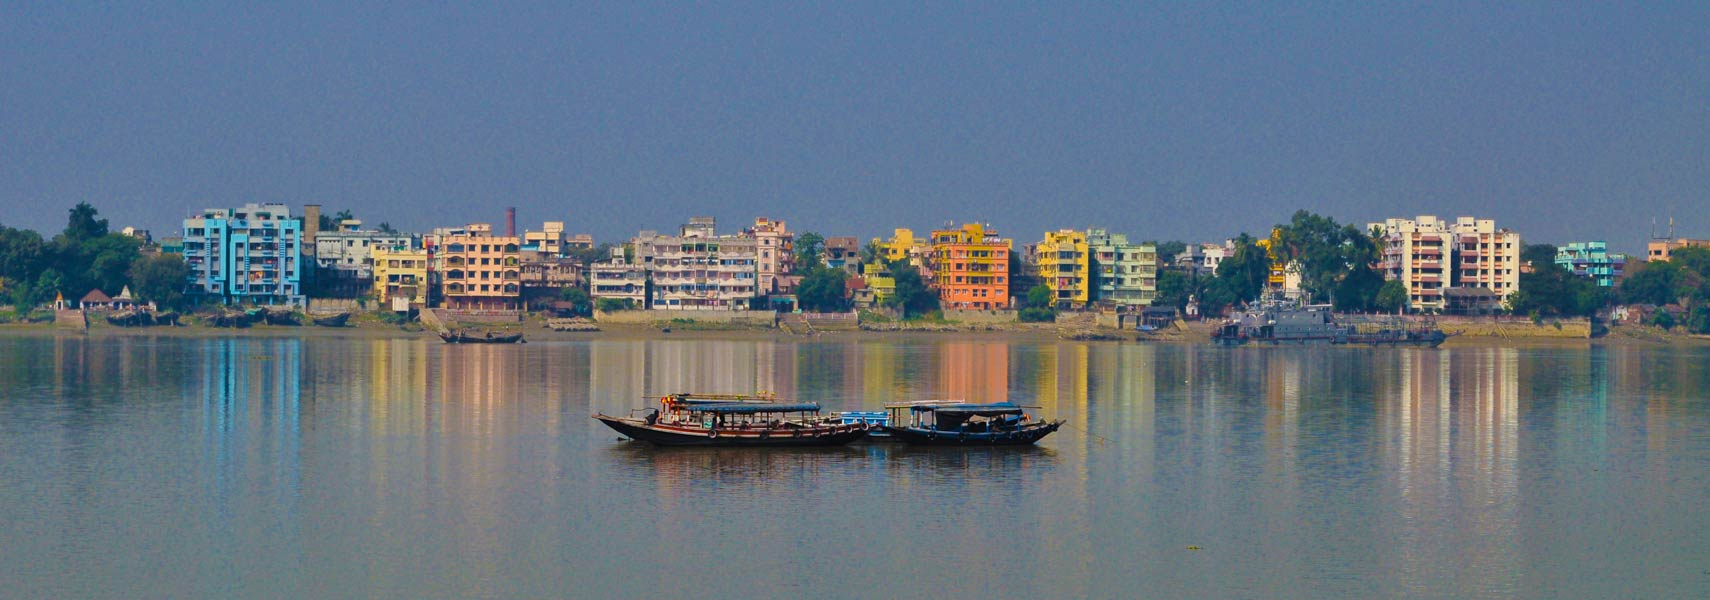 View of Kolkata from the banks of the River Ganga in West Bengal